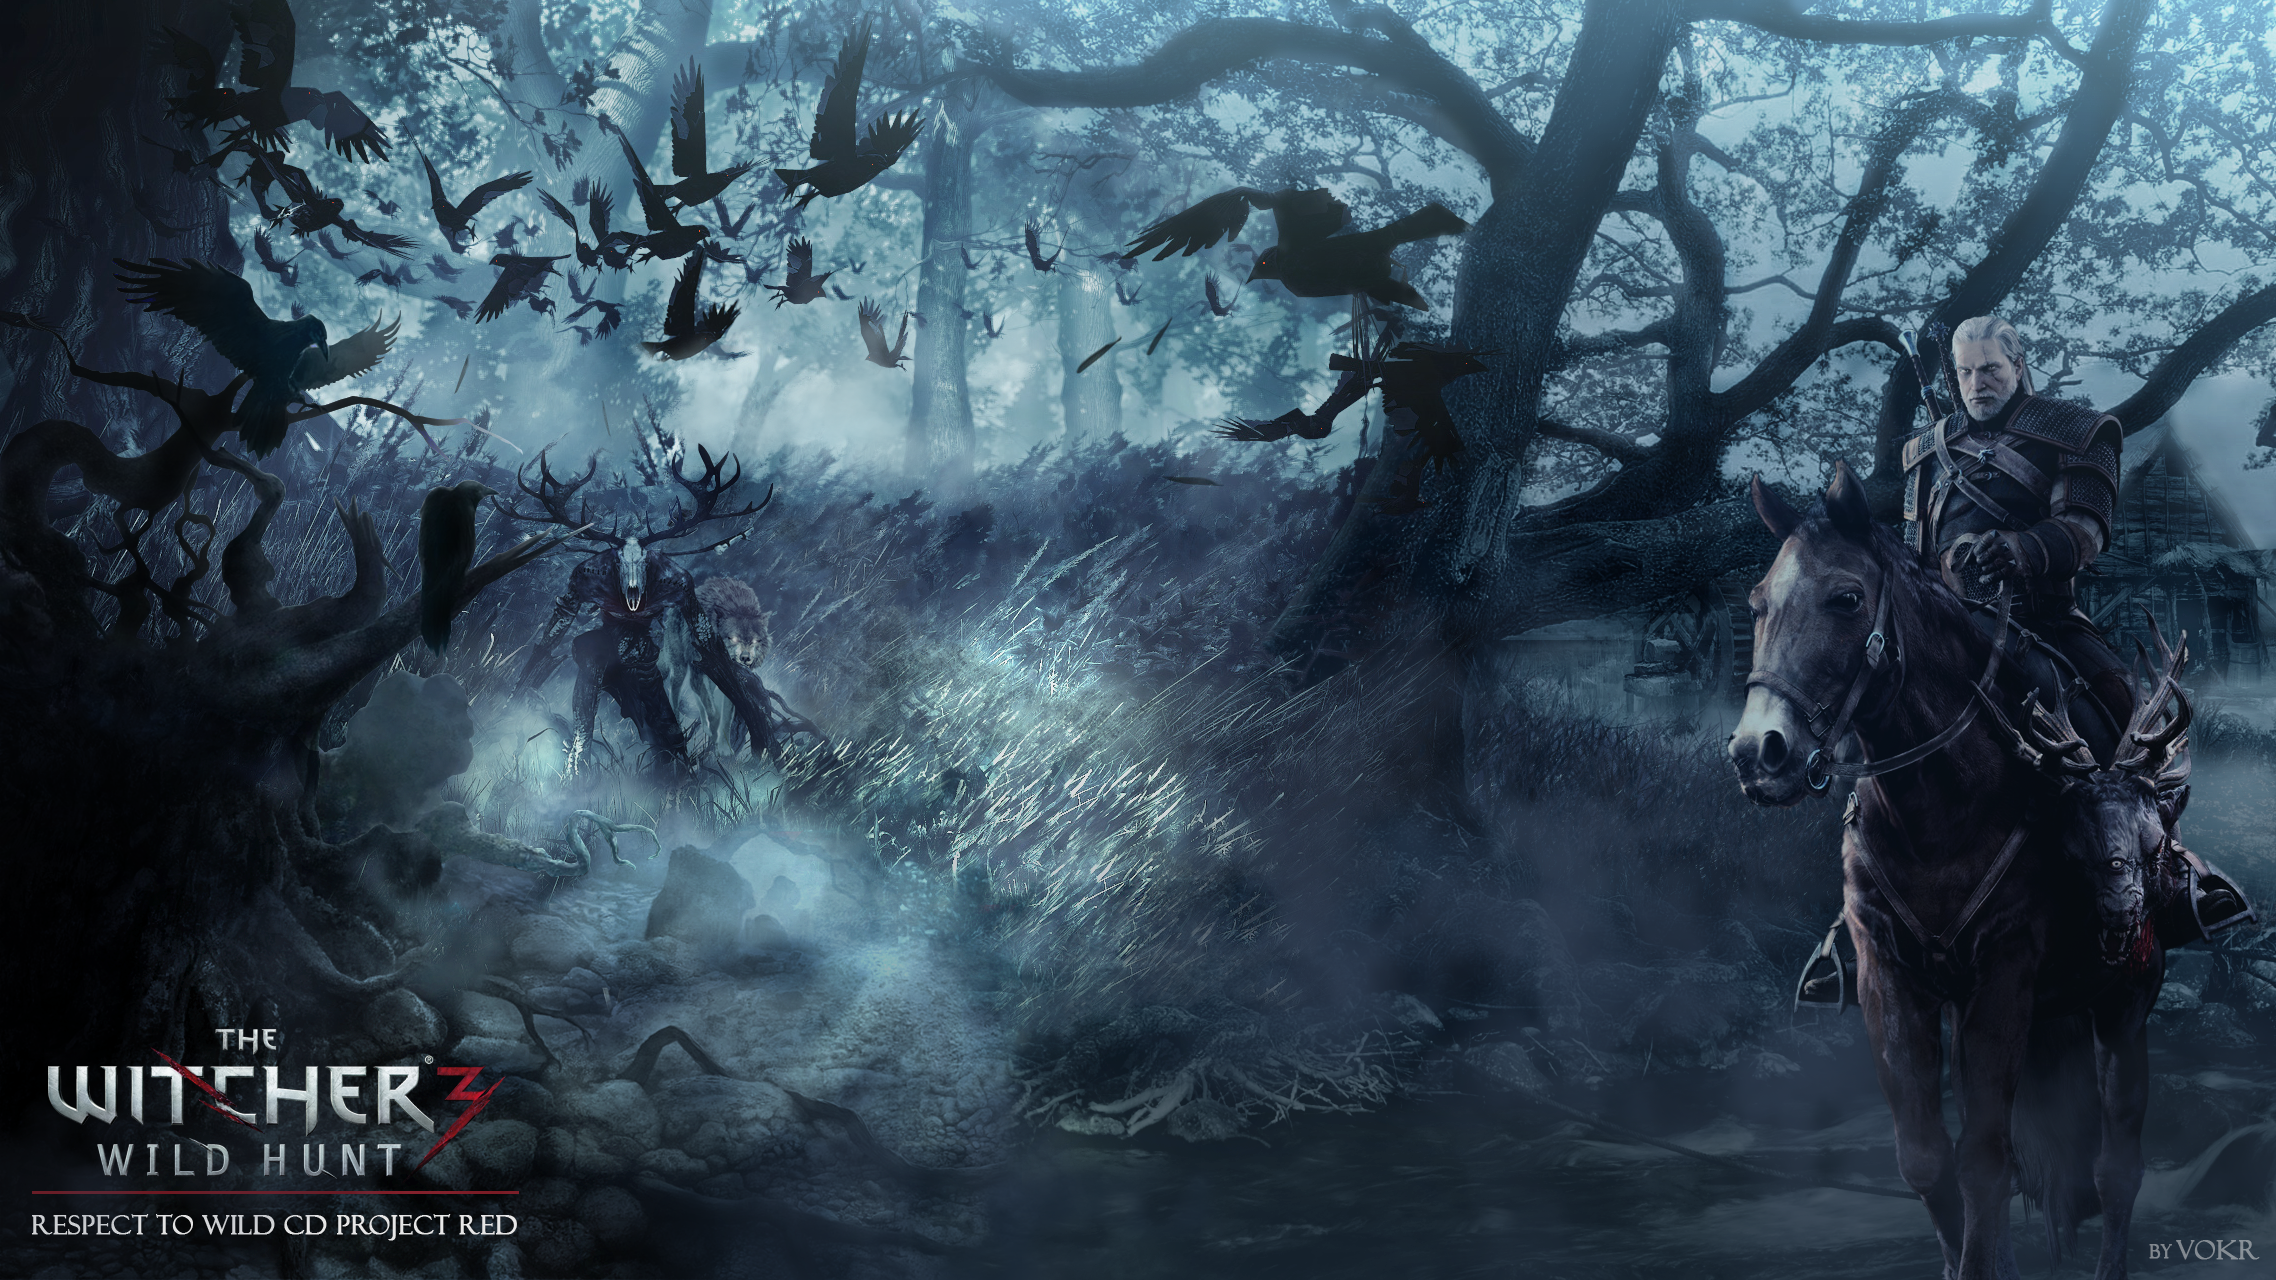 The Witcher 3 Wild Hunt Wallpaper by Vokr 2276x1280